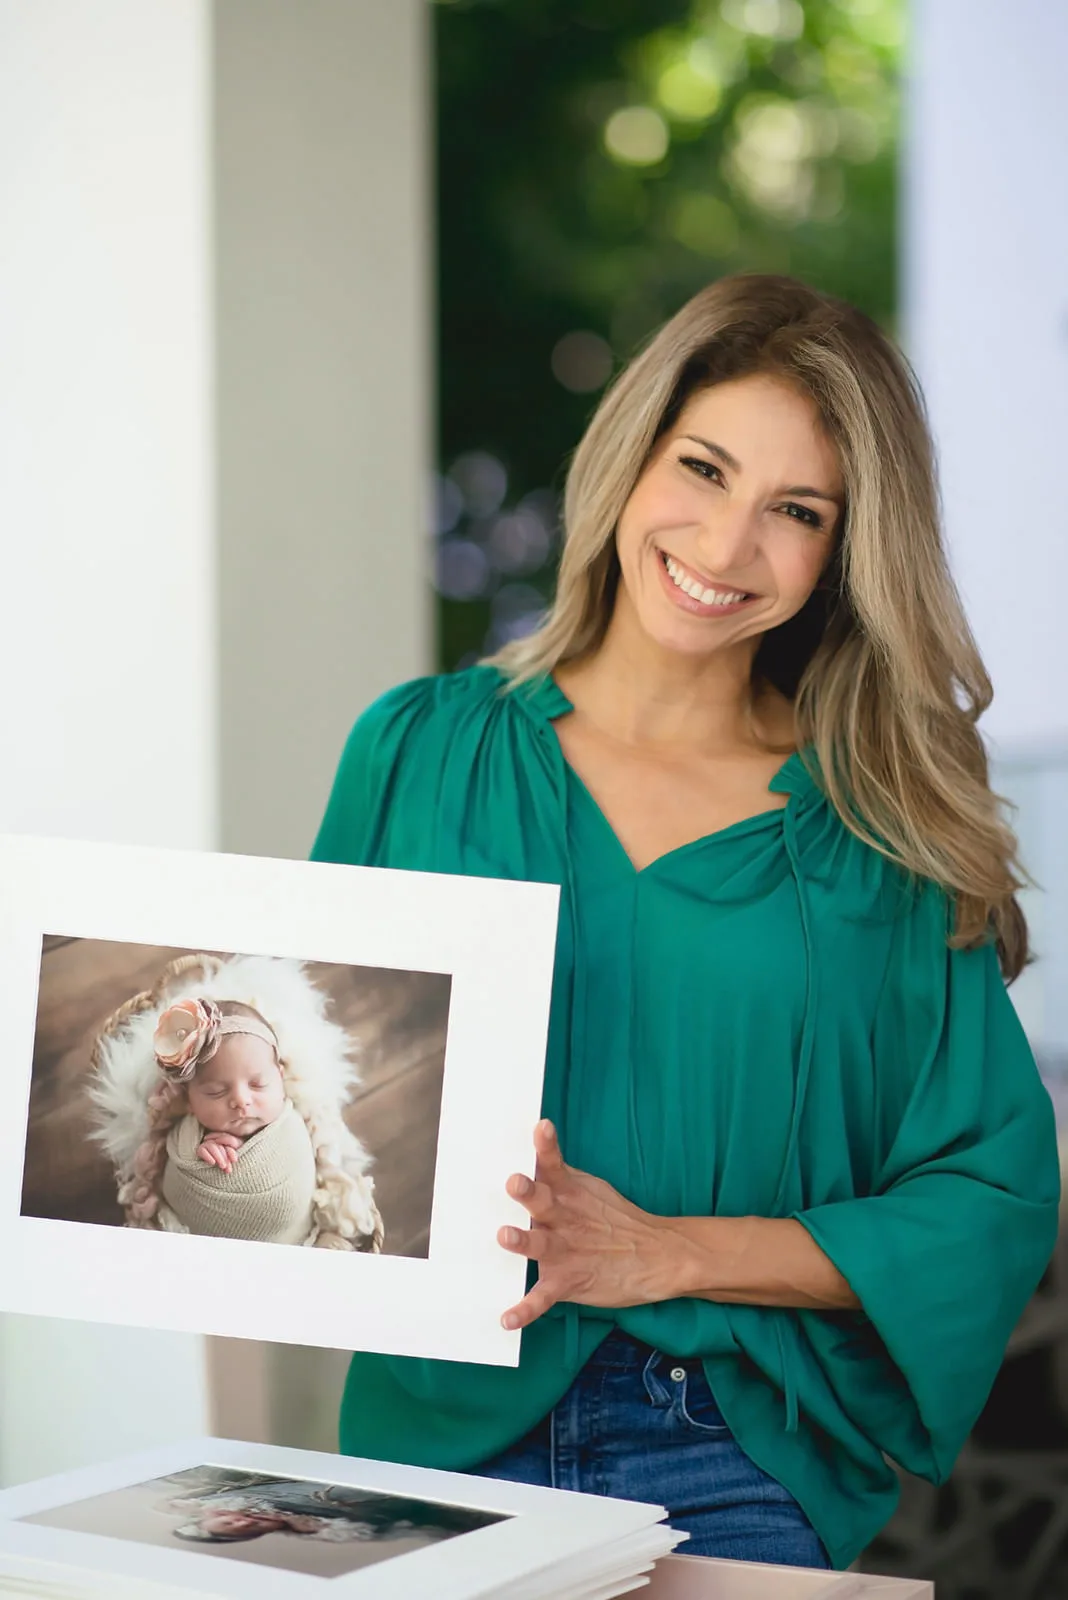 Miami Photographer MeliB holding up a photo of a newborn baby.